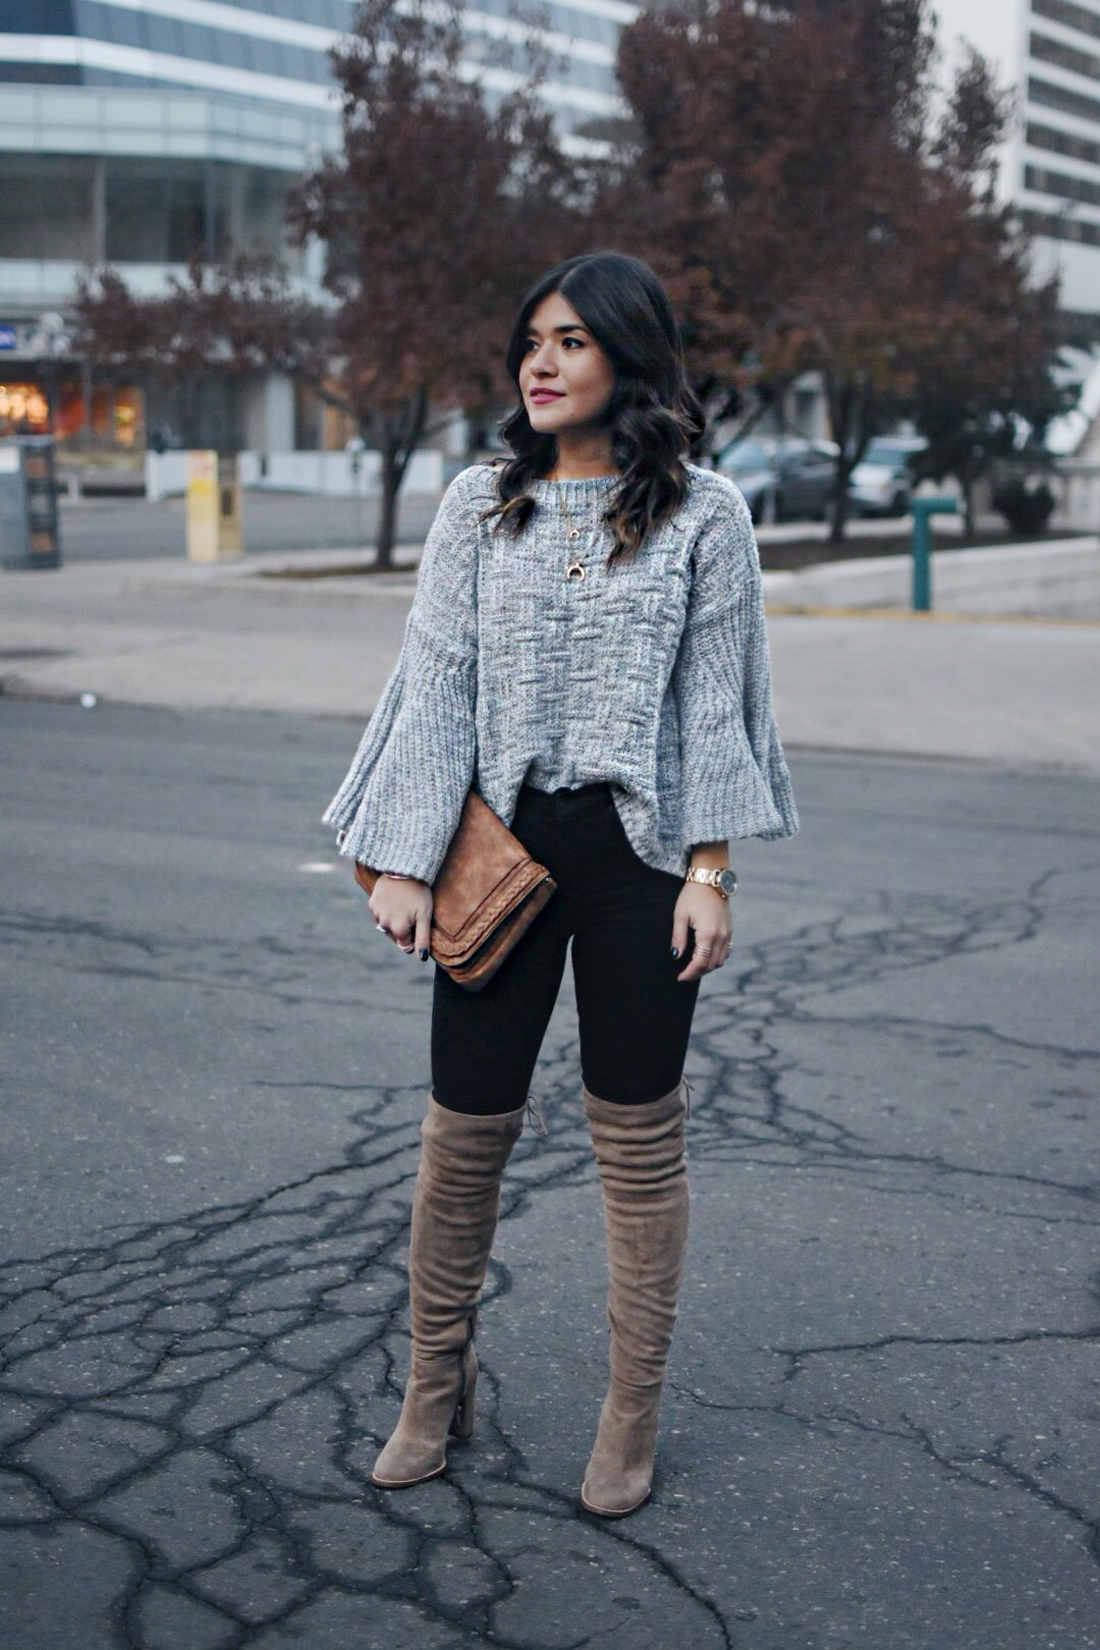 Carolina Hellal of Chic Talk wearing  Shein Grey sweater, black jeans and Vince Camuto over the knee boots.